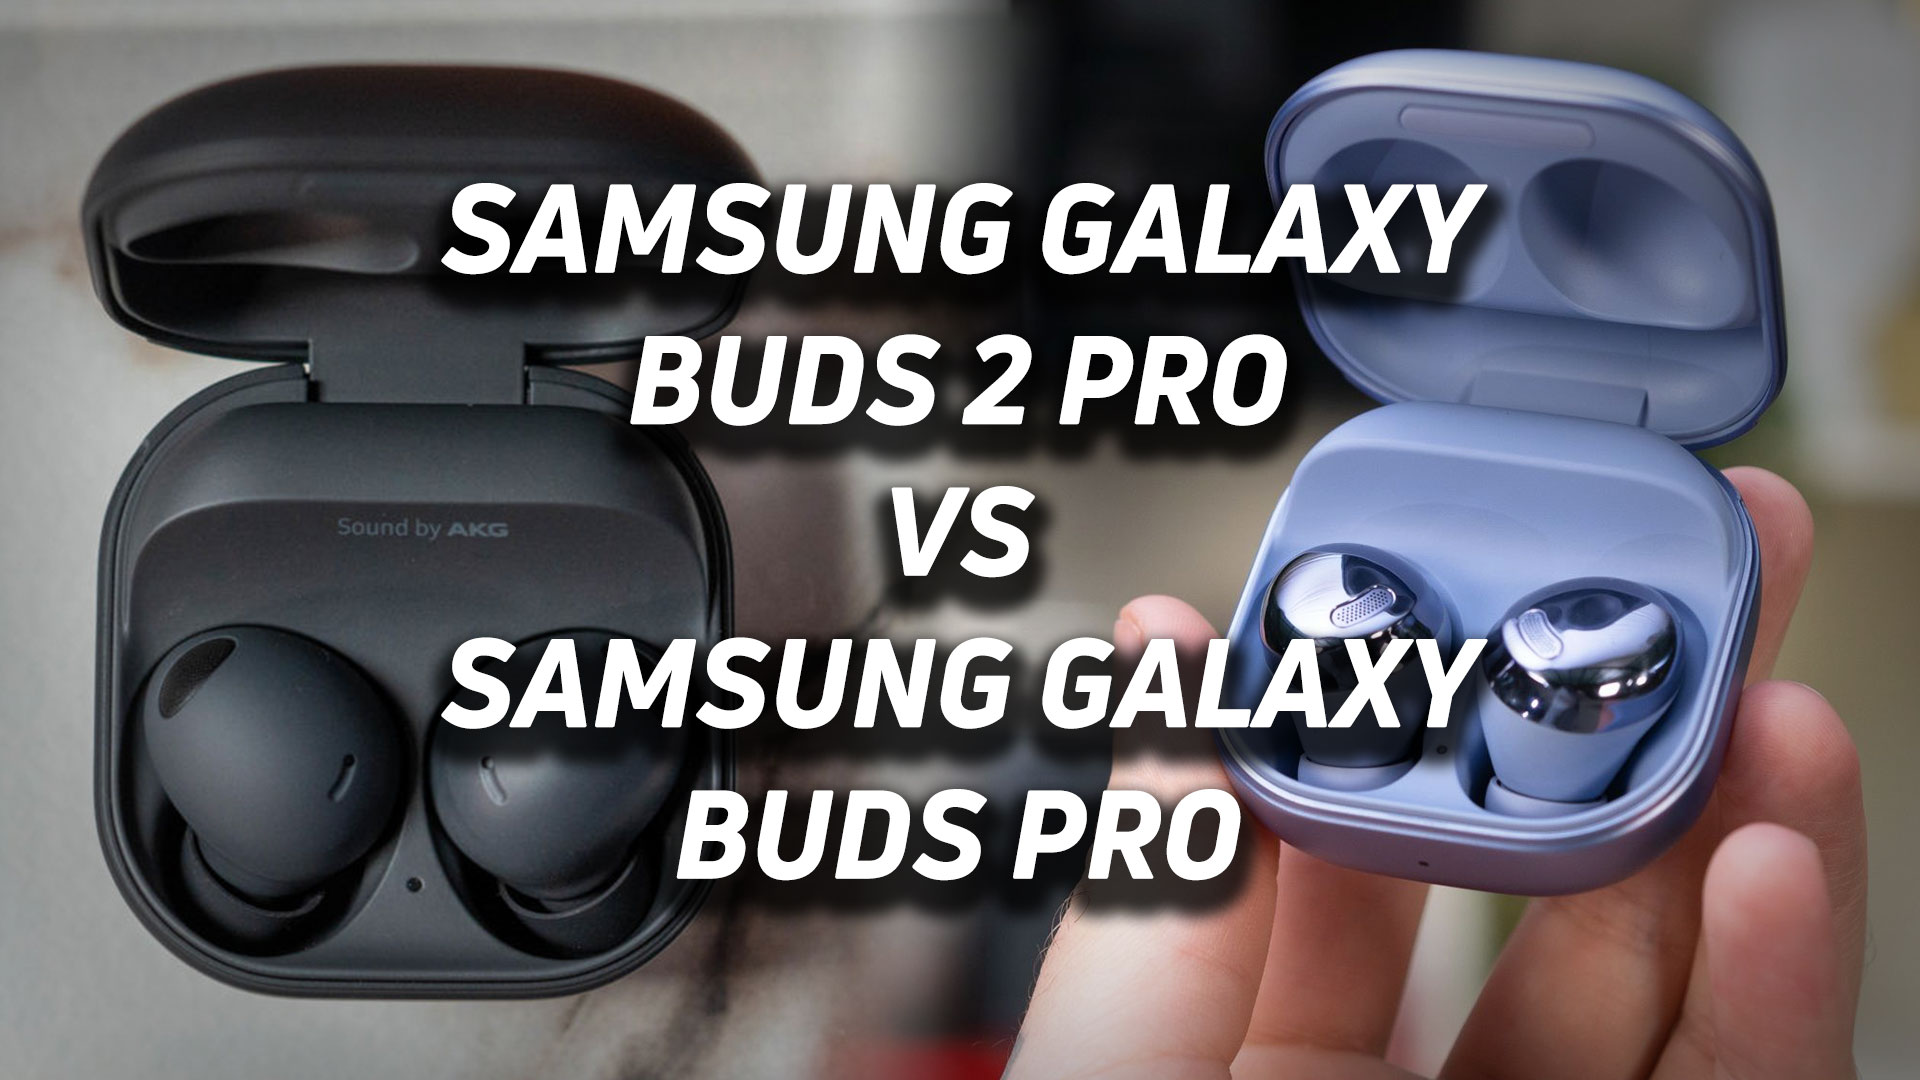 A blended image of the Samsung Galaxy Buds 2 Pro and Galaxy Buds Pro with versus text overlaid.